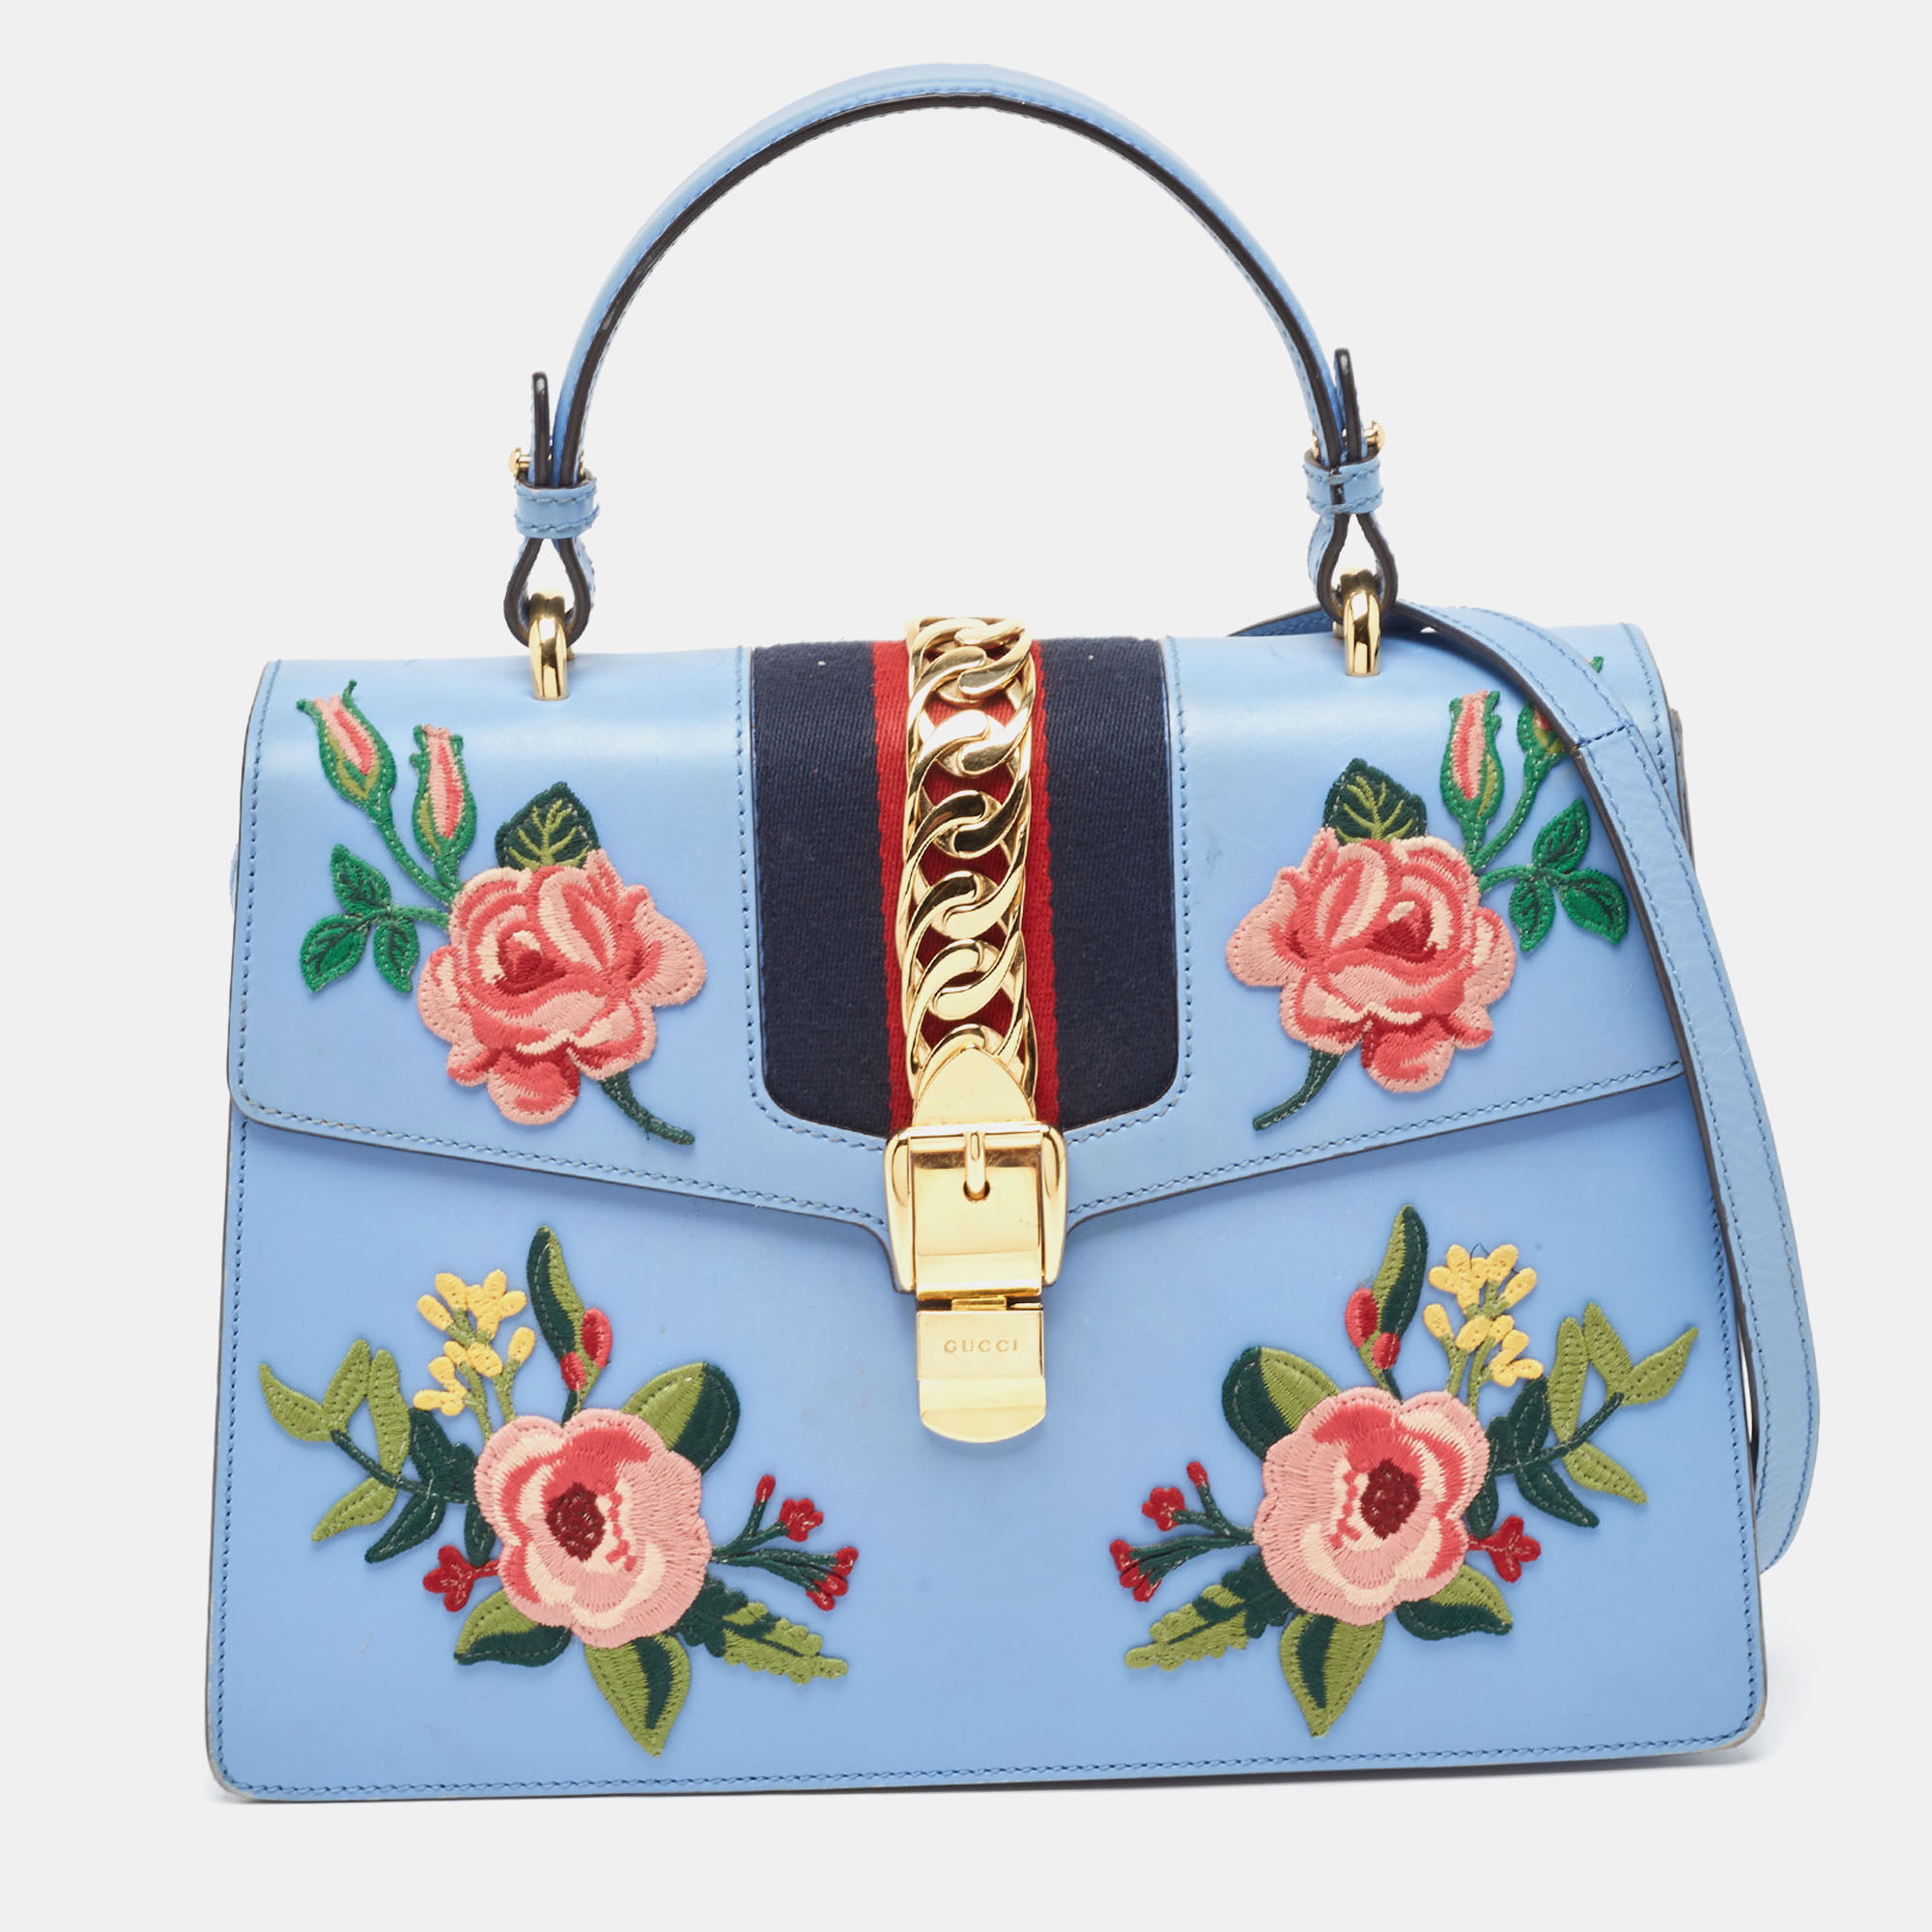 Pre-owned Gucci Blue Floral Embroidered Leather Medium Sylvie Top Handle Bag